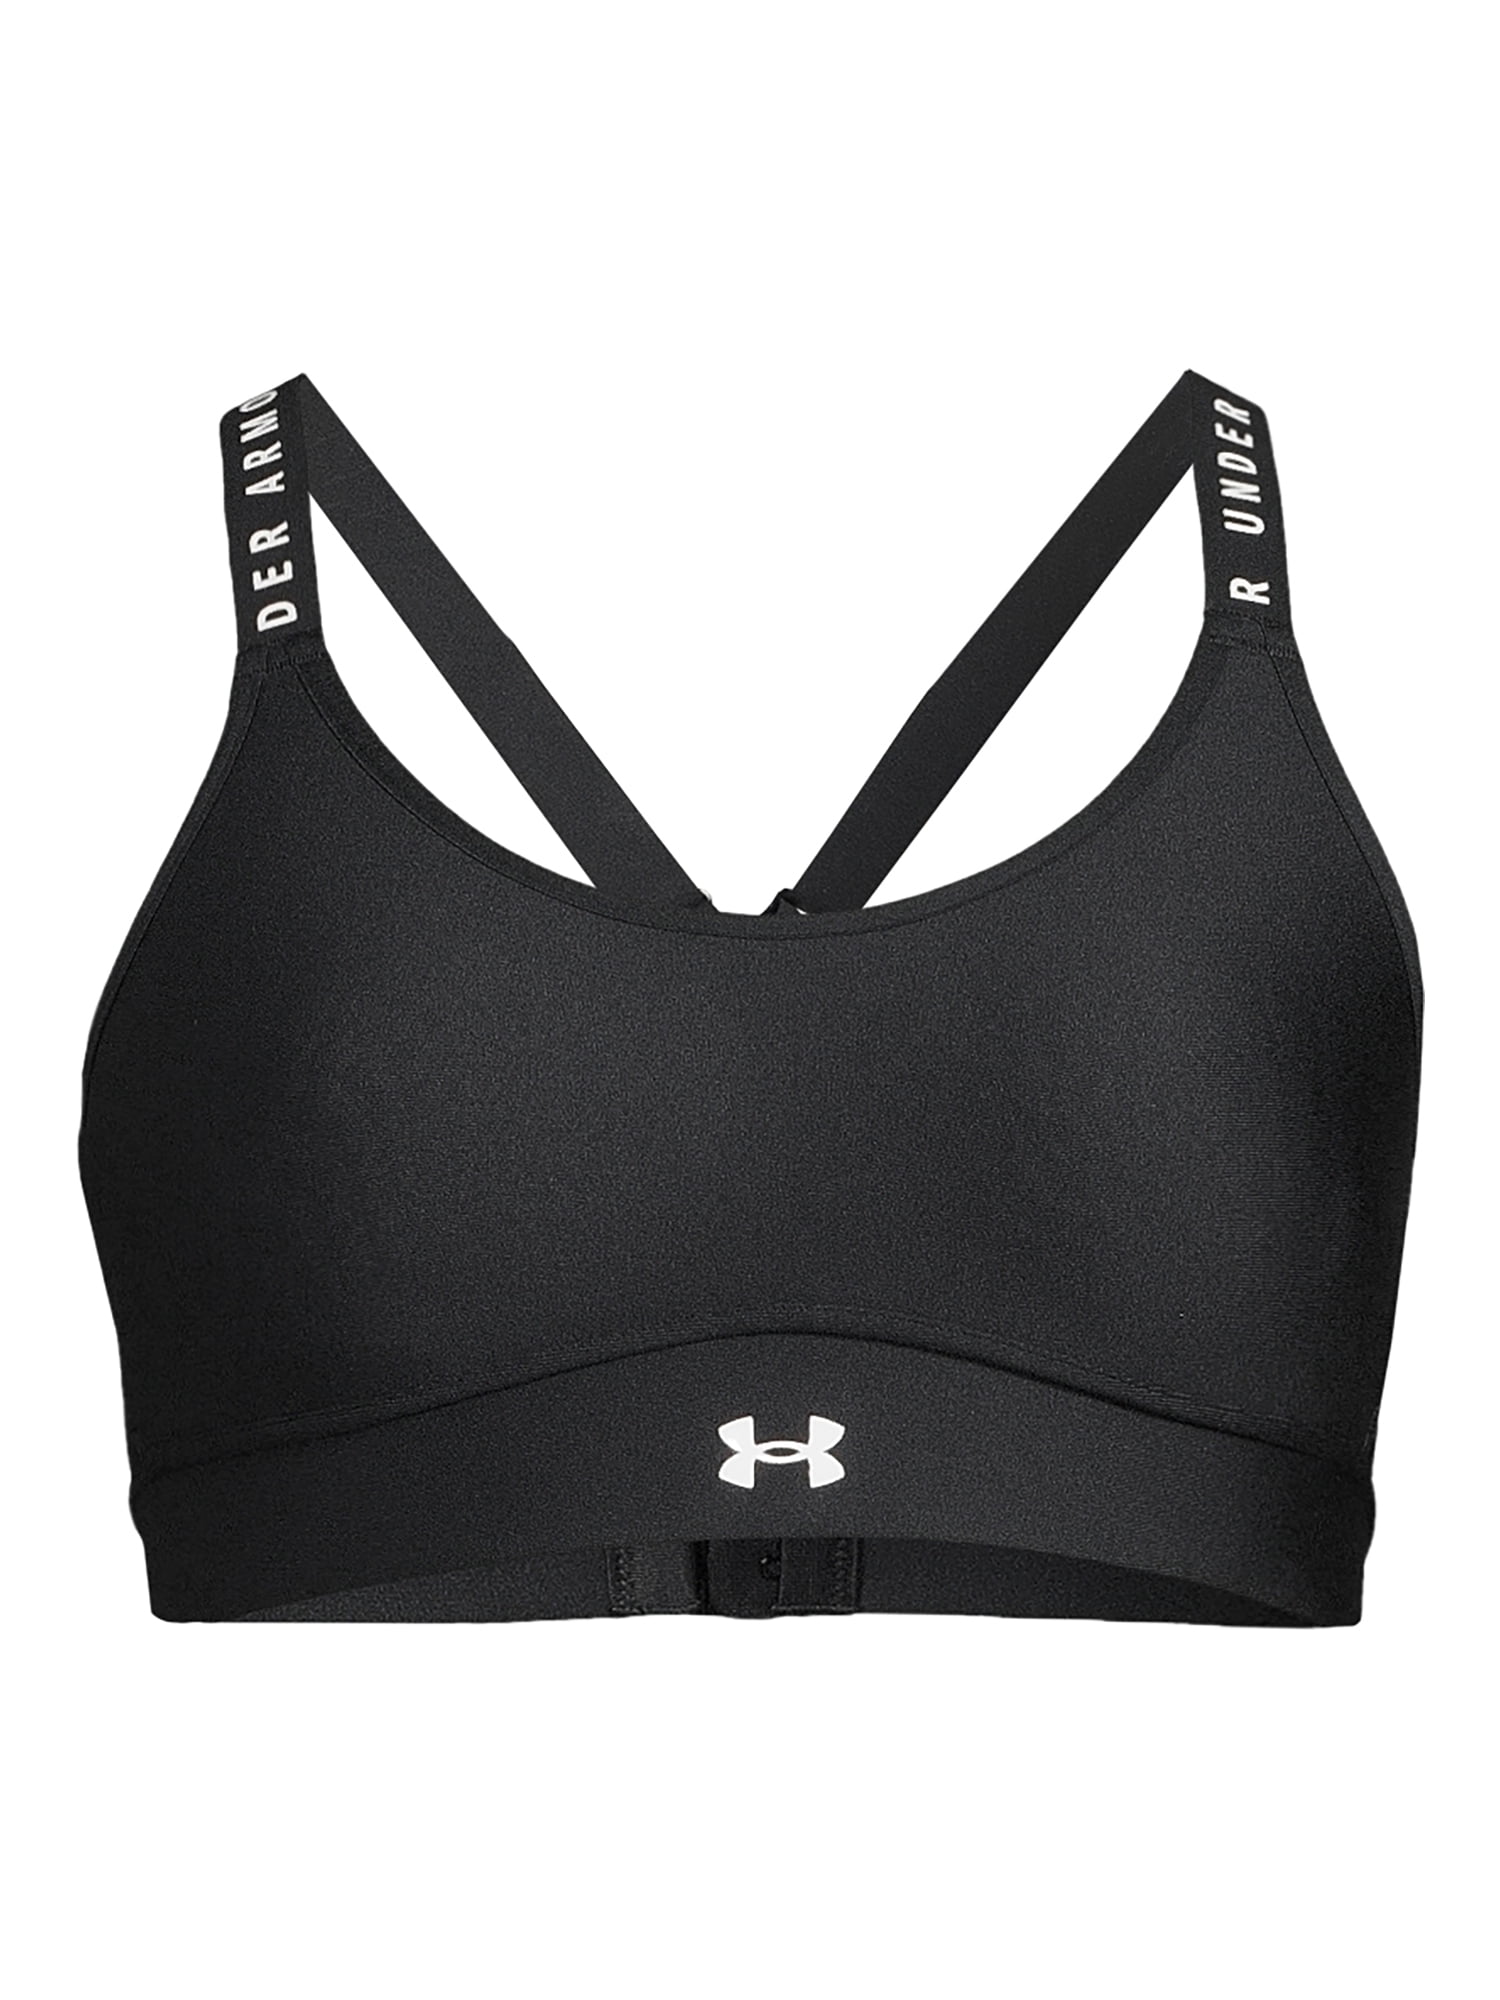 Under Armour Women's Infinity Mid Covered Sports Bra 